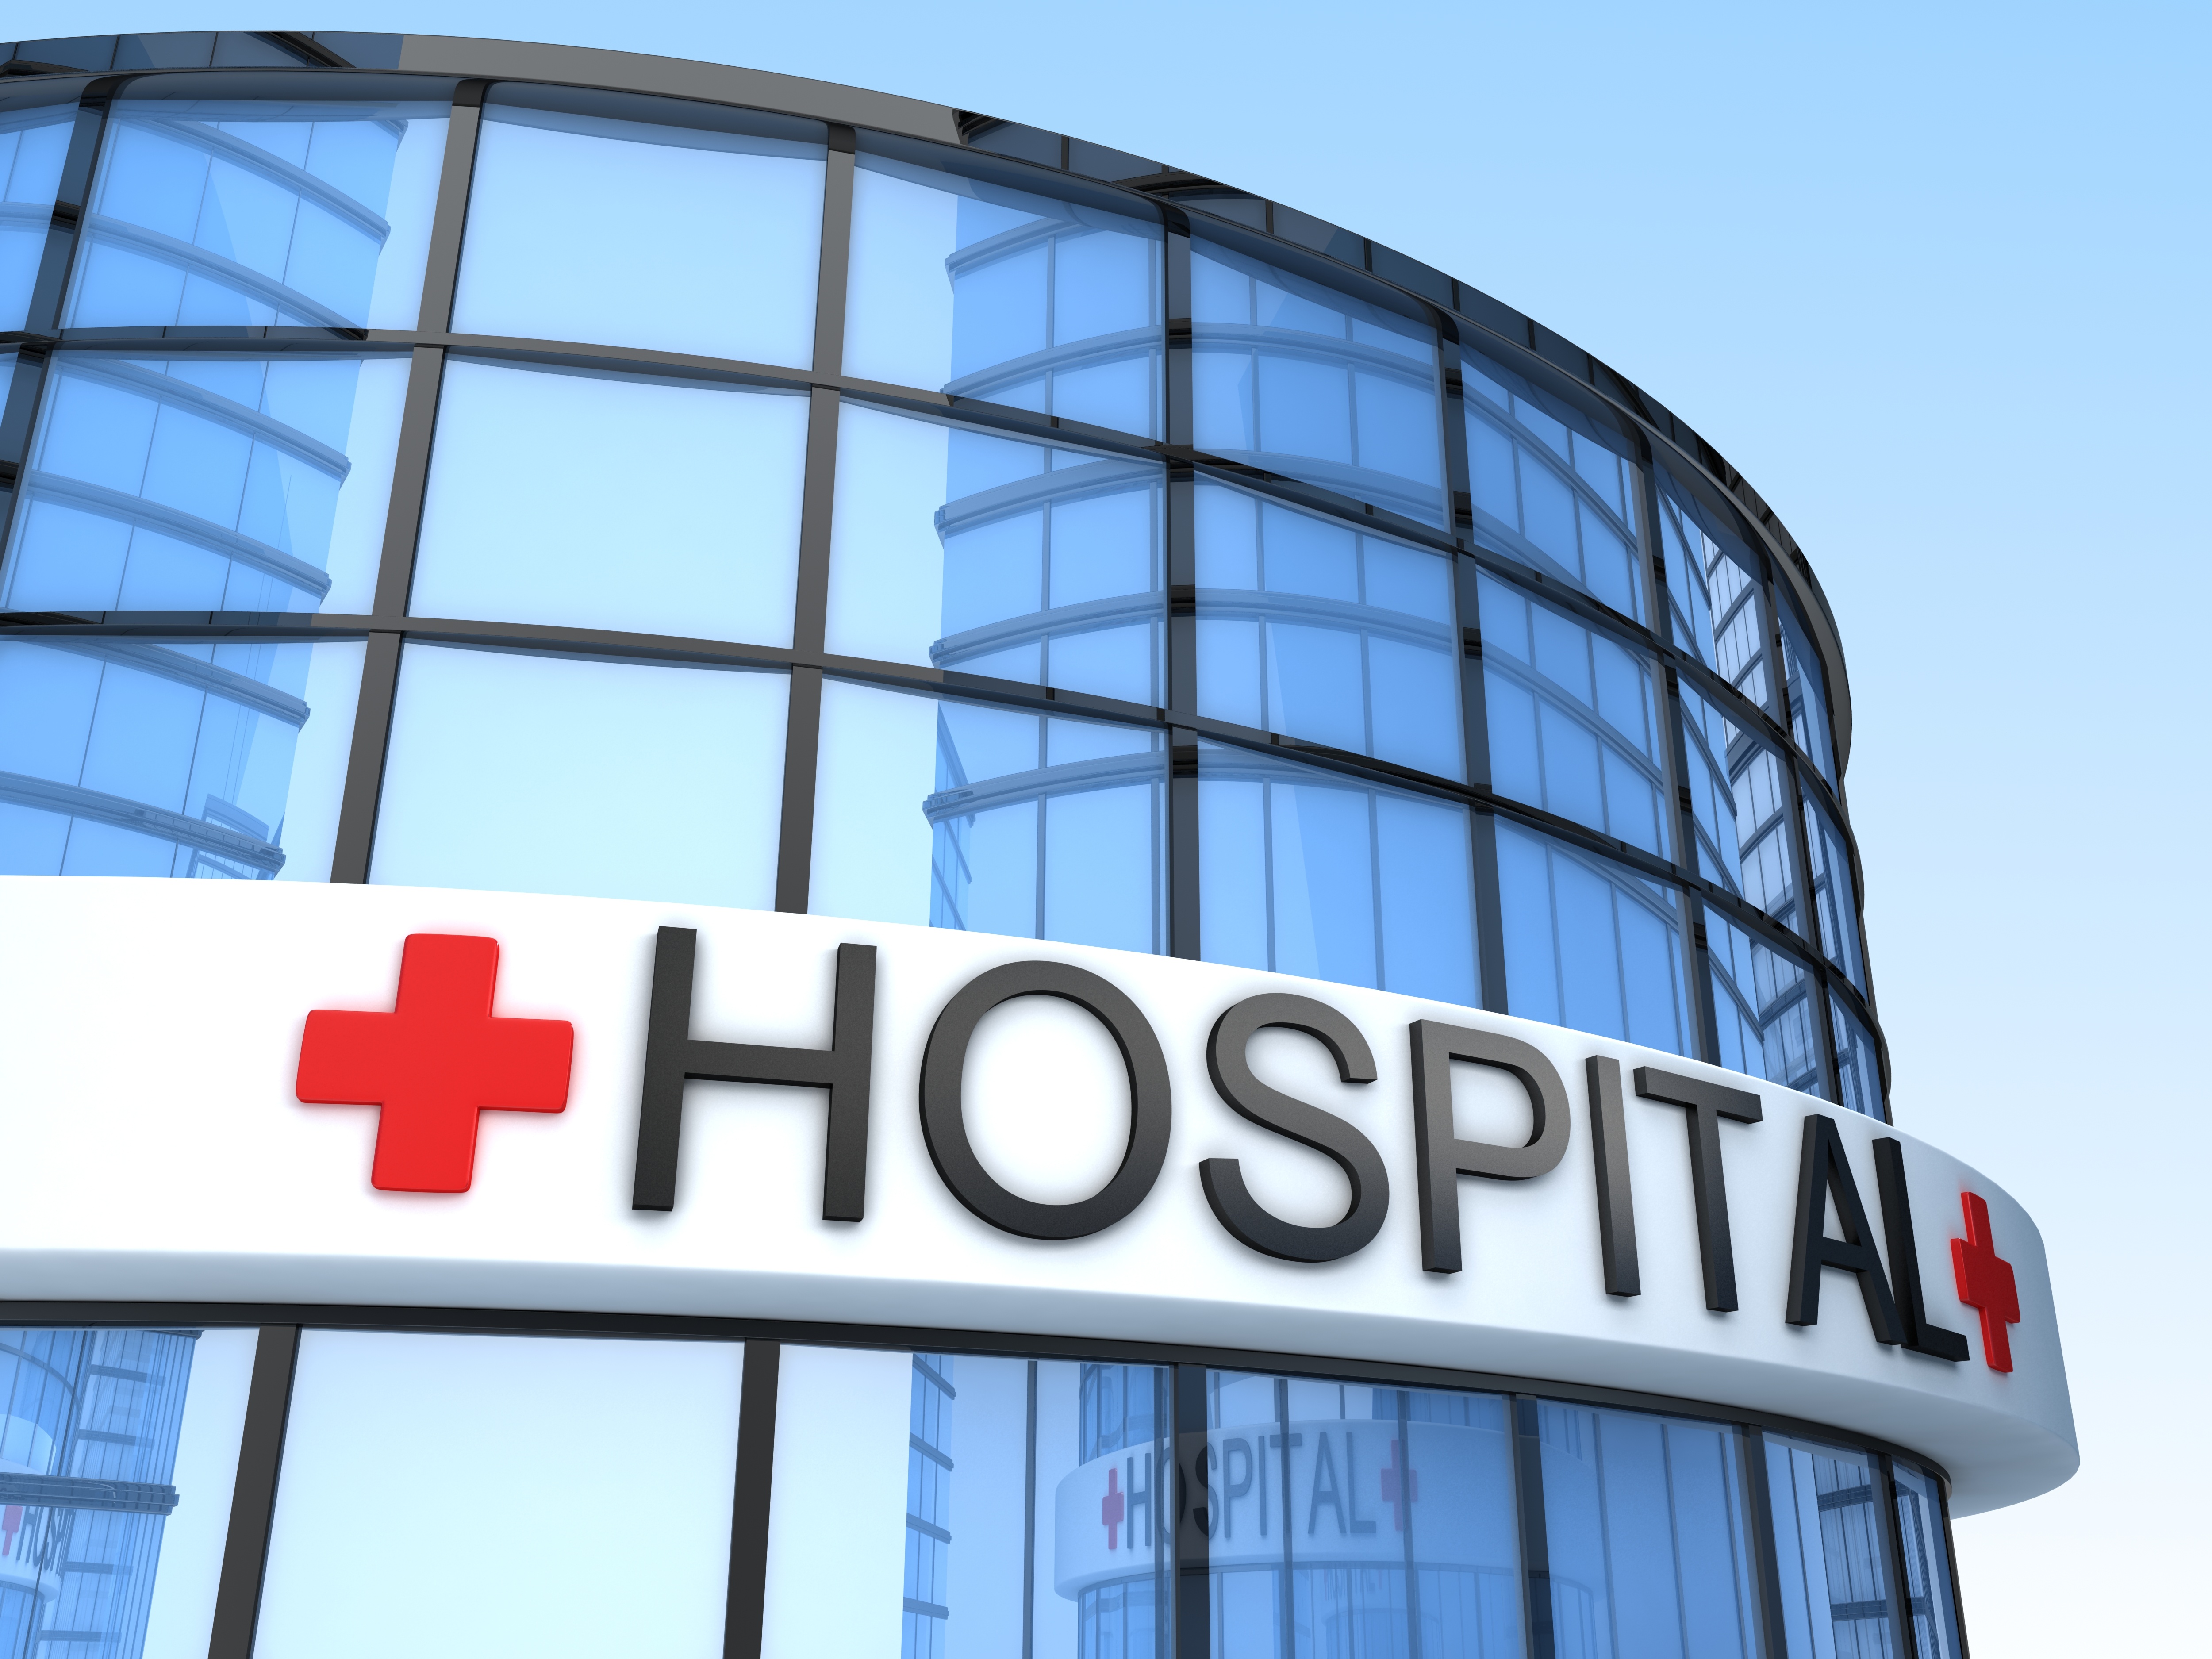 Publicizing hospital ratings doesn't always spur improvement